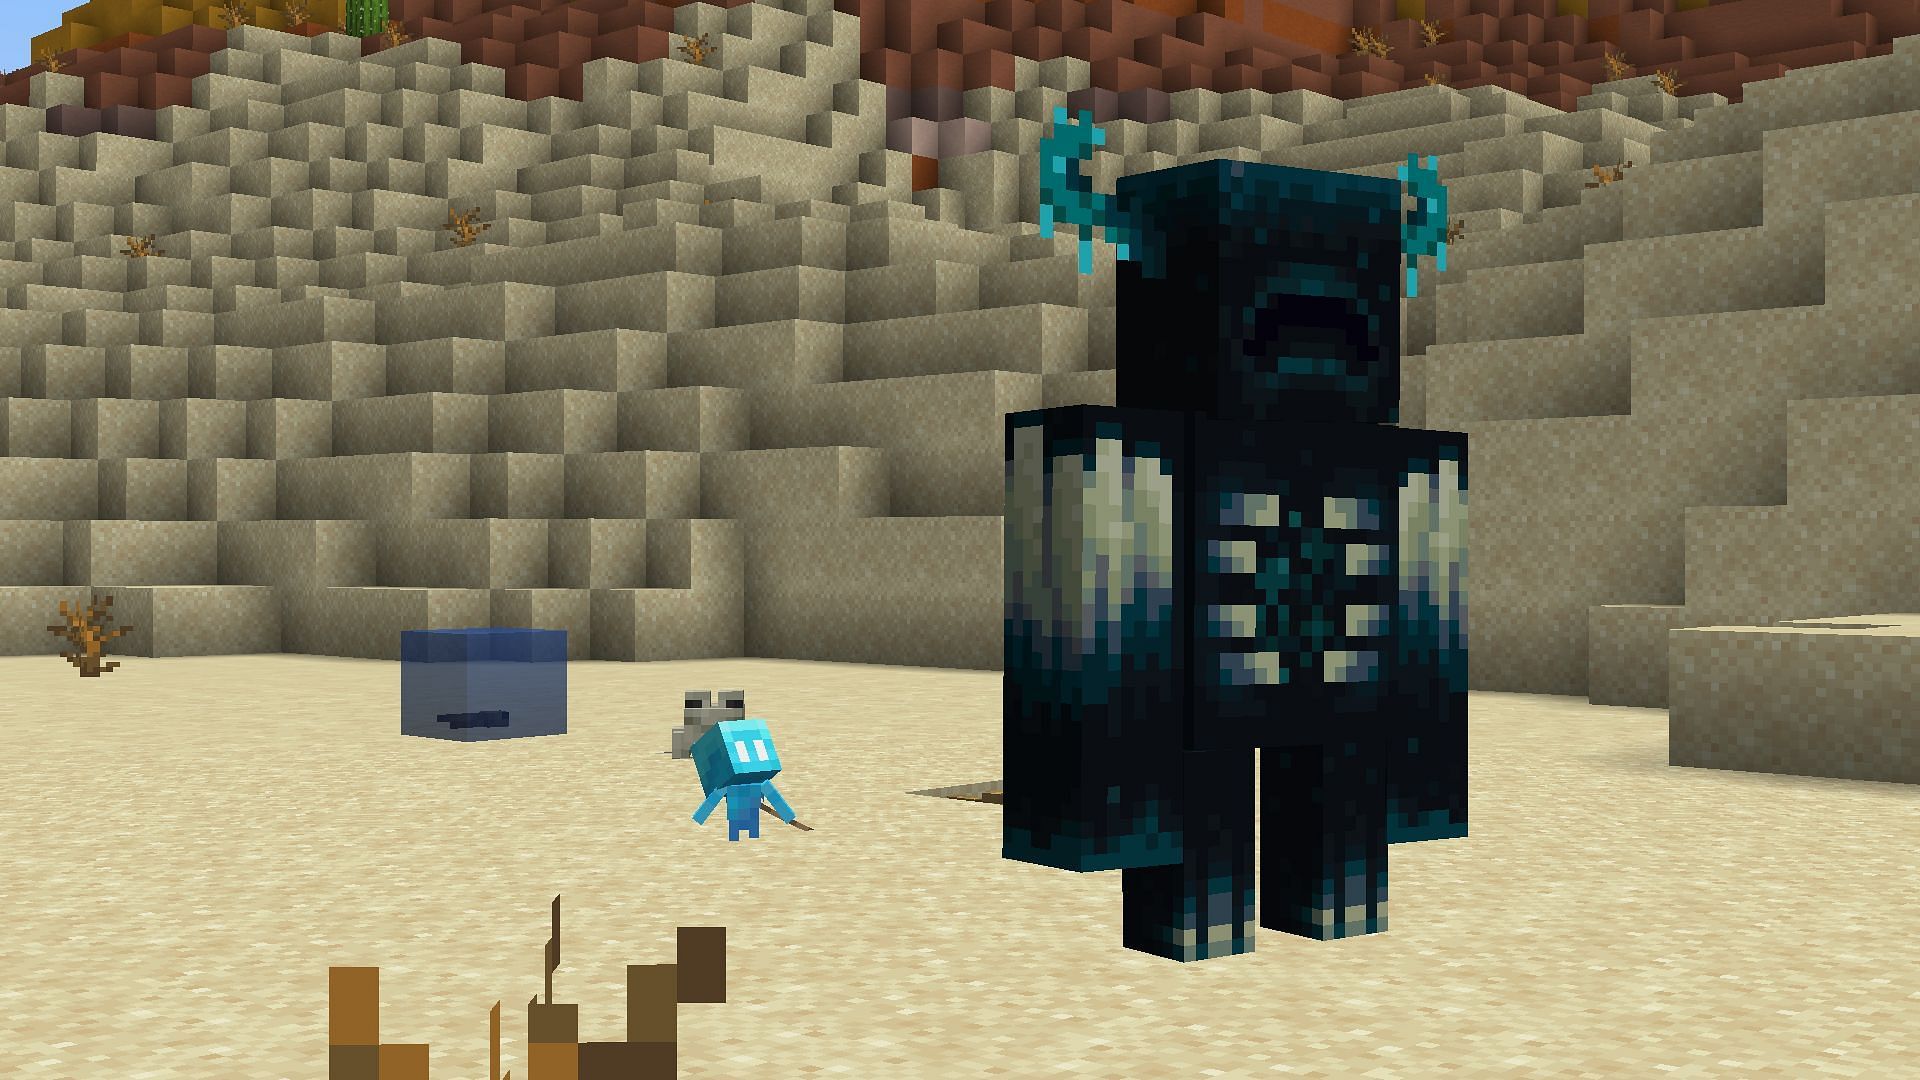 The Warden is one of the tallest and scariest mobs in Minecraft (Image via Mojang)